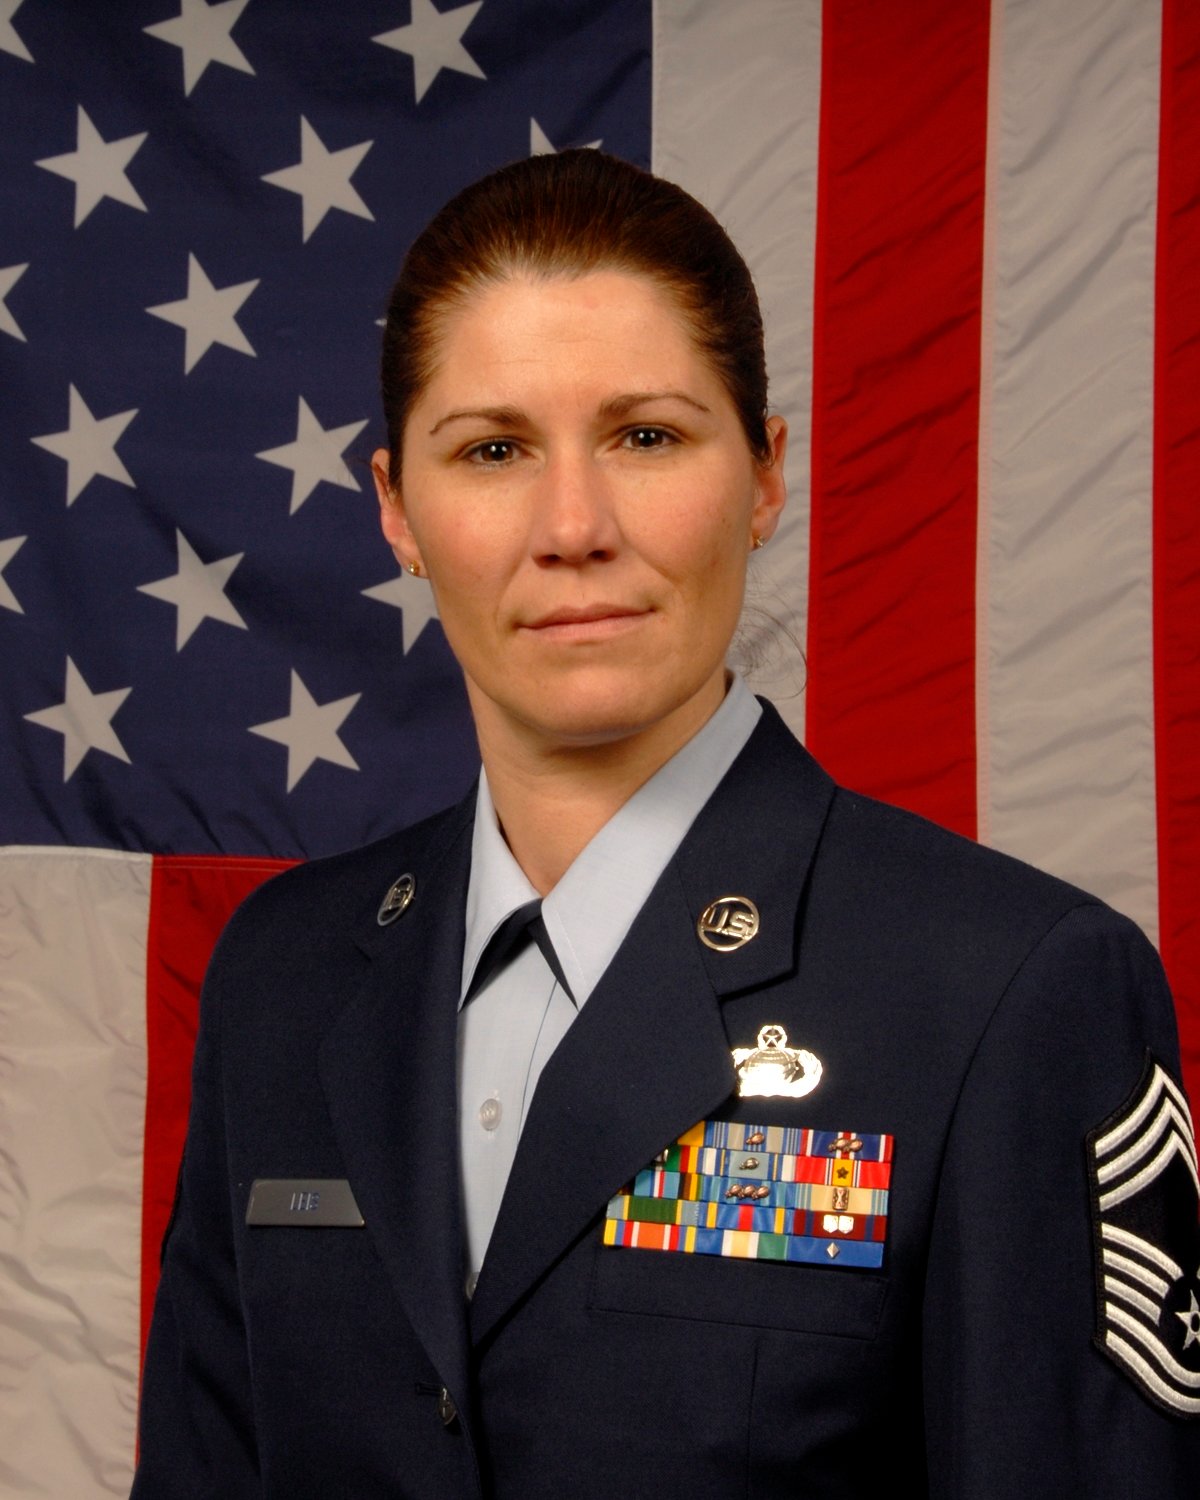 Chief Master Sgt. Marcelle Leis enlisted in the United States Air Force and New York Air National Guard in 1989.